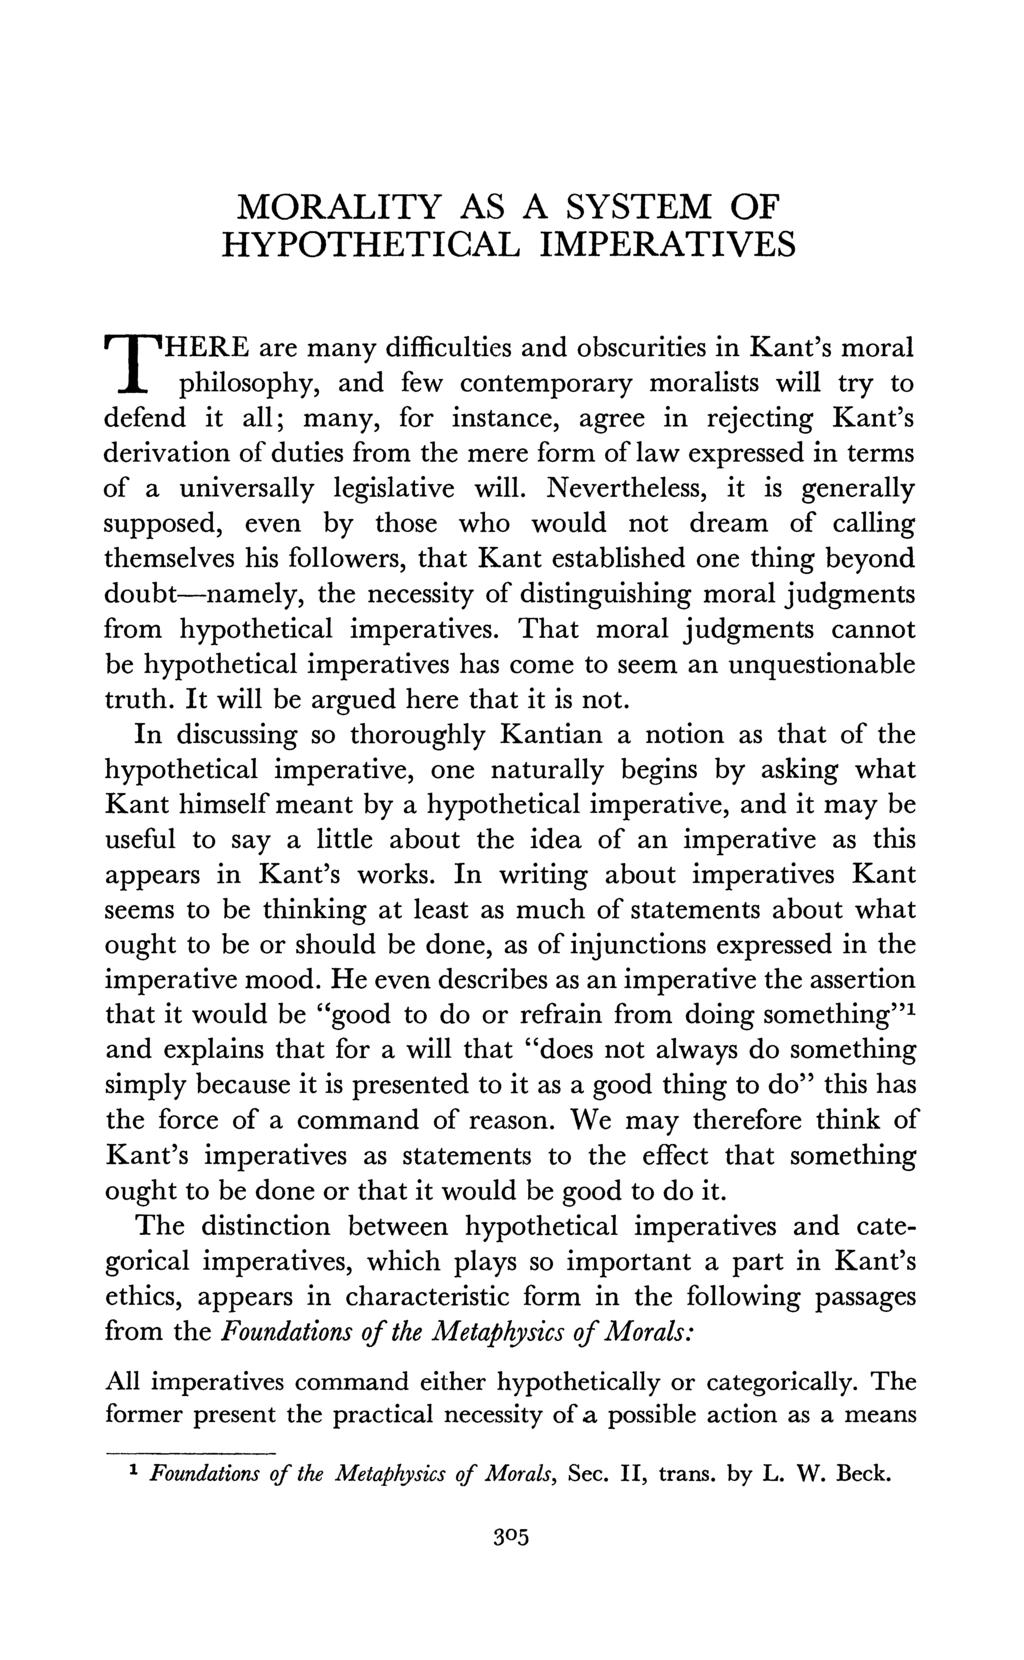 MORALITY AS A SYSTEM OF HYPOTHETICAL IMPERATIVES T HERE are many difficulties and obscurities in Kant's moral philosophy, and few contemporary moralists will try to defend it all; many, for instance,